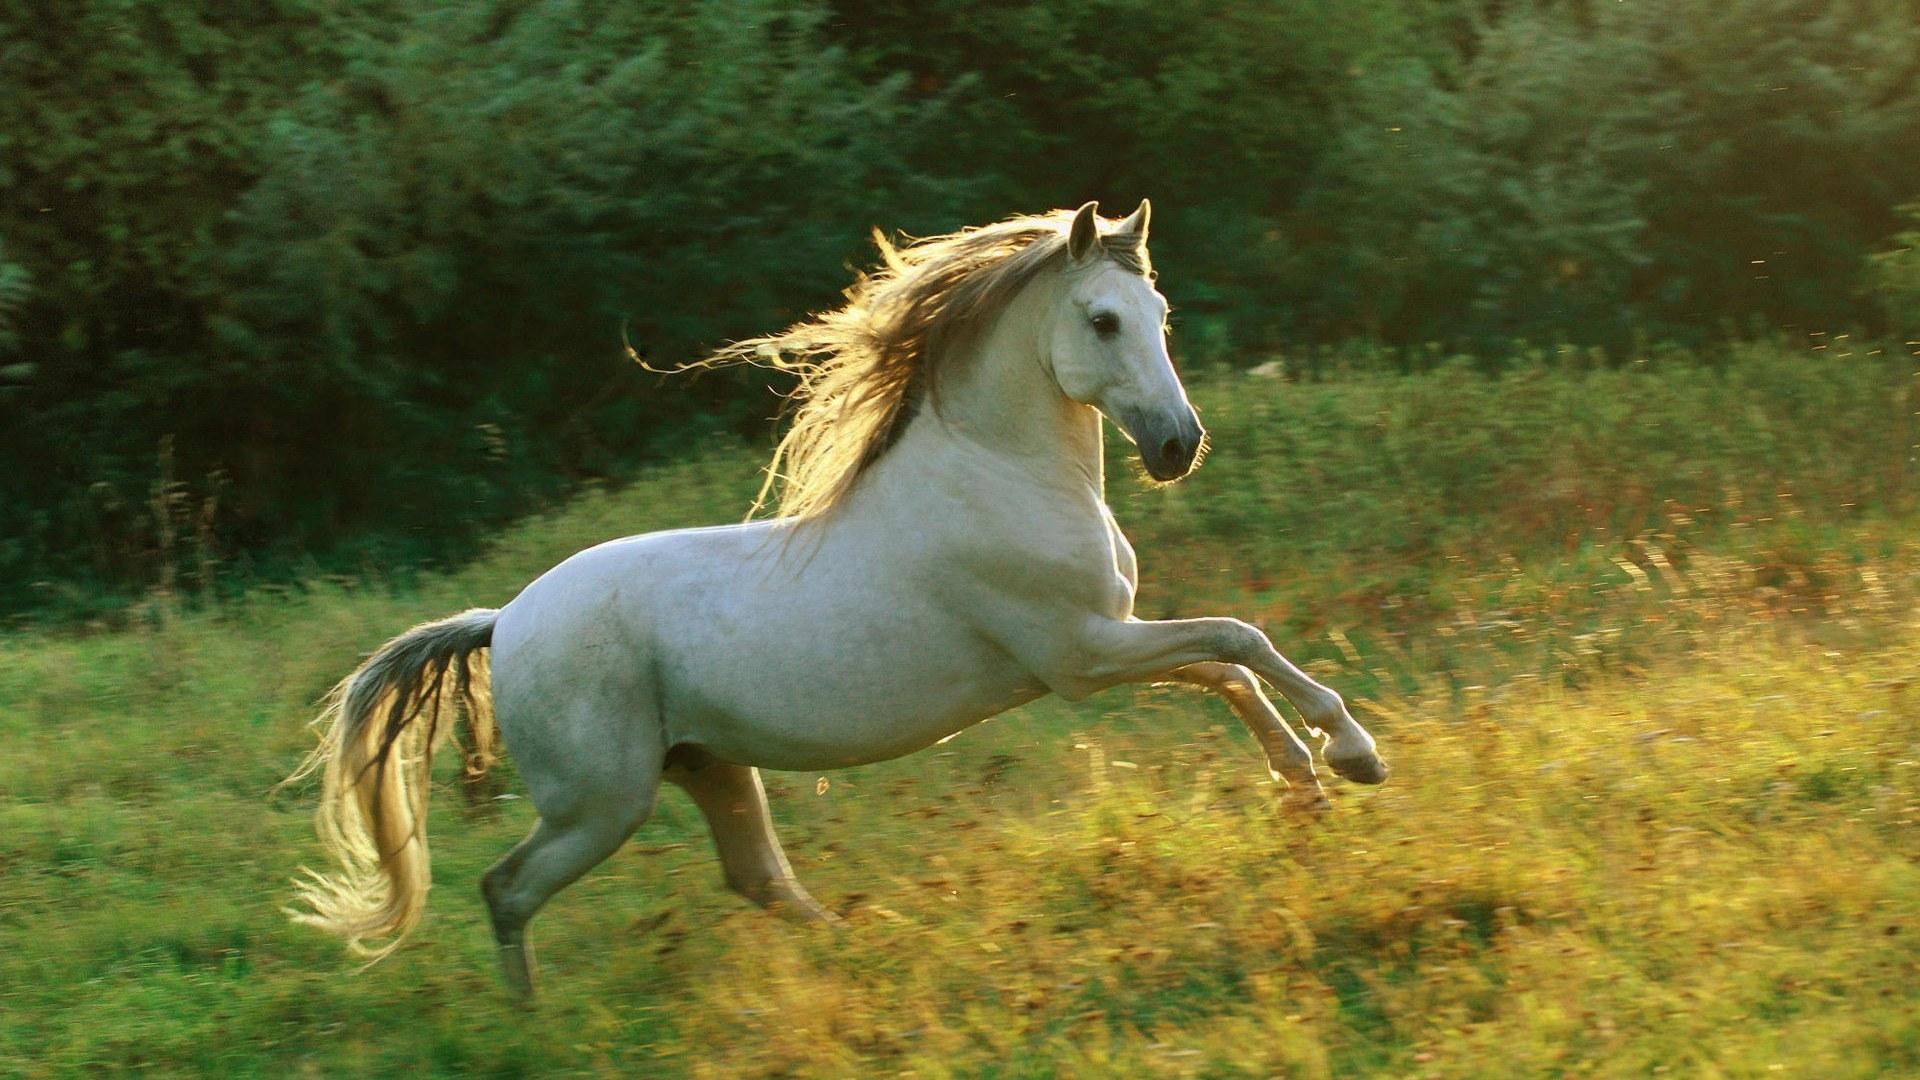 Horse Wallpaper Category Of HD Screensavers Is